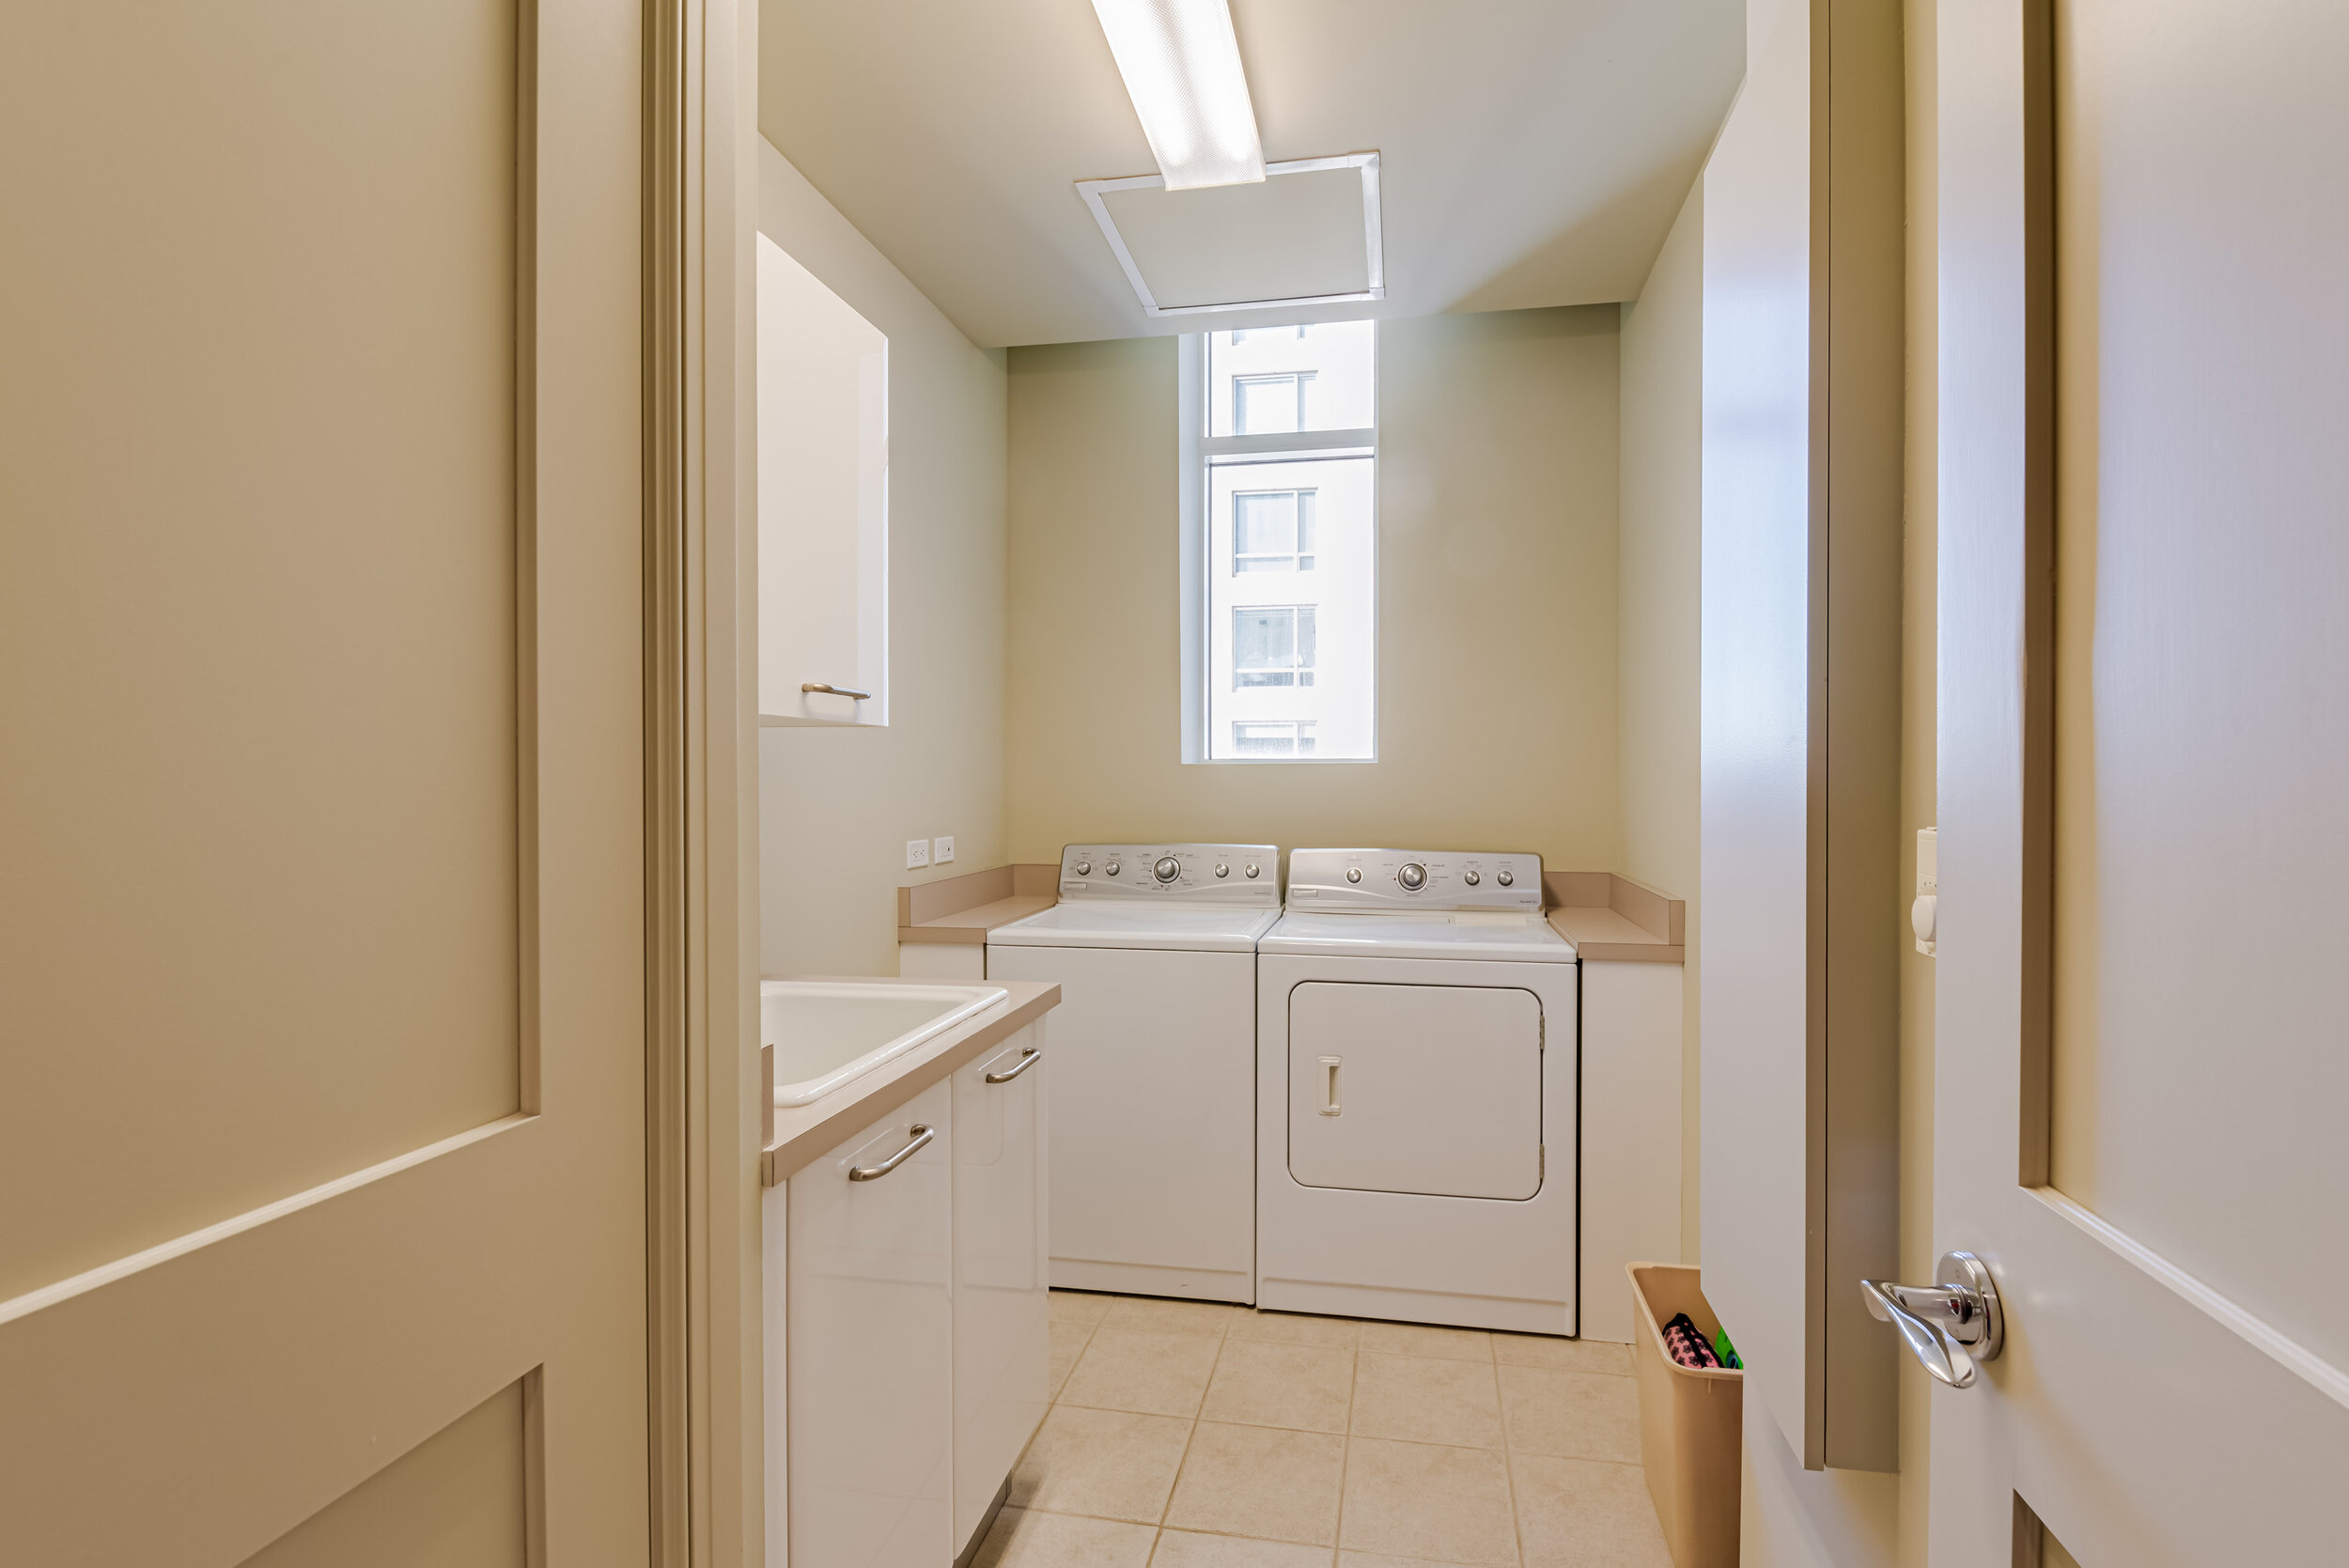 Laundry Room with Added Storage